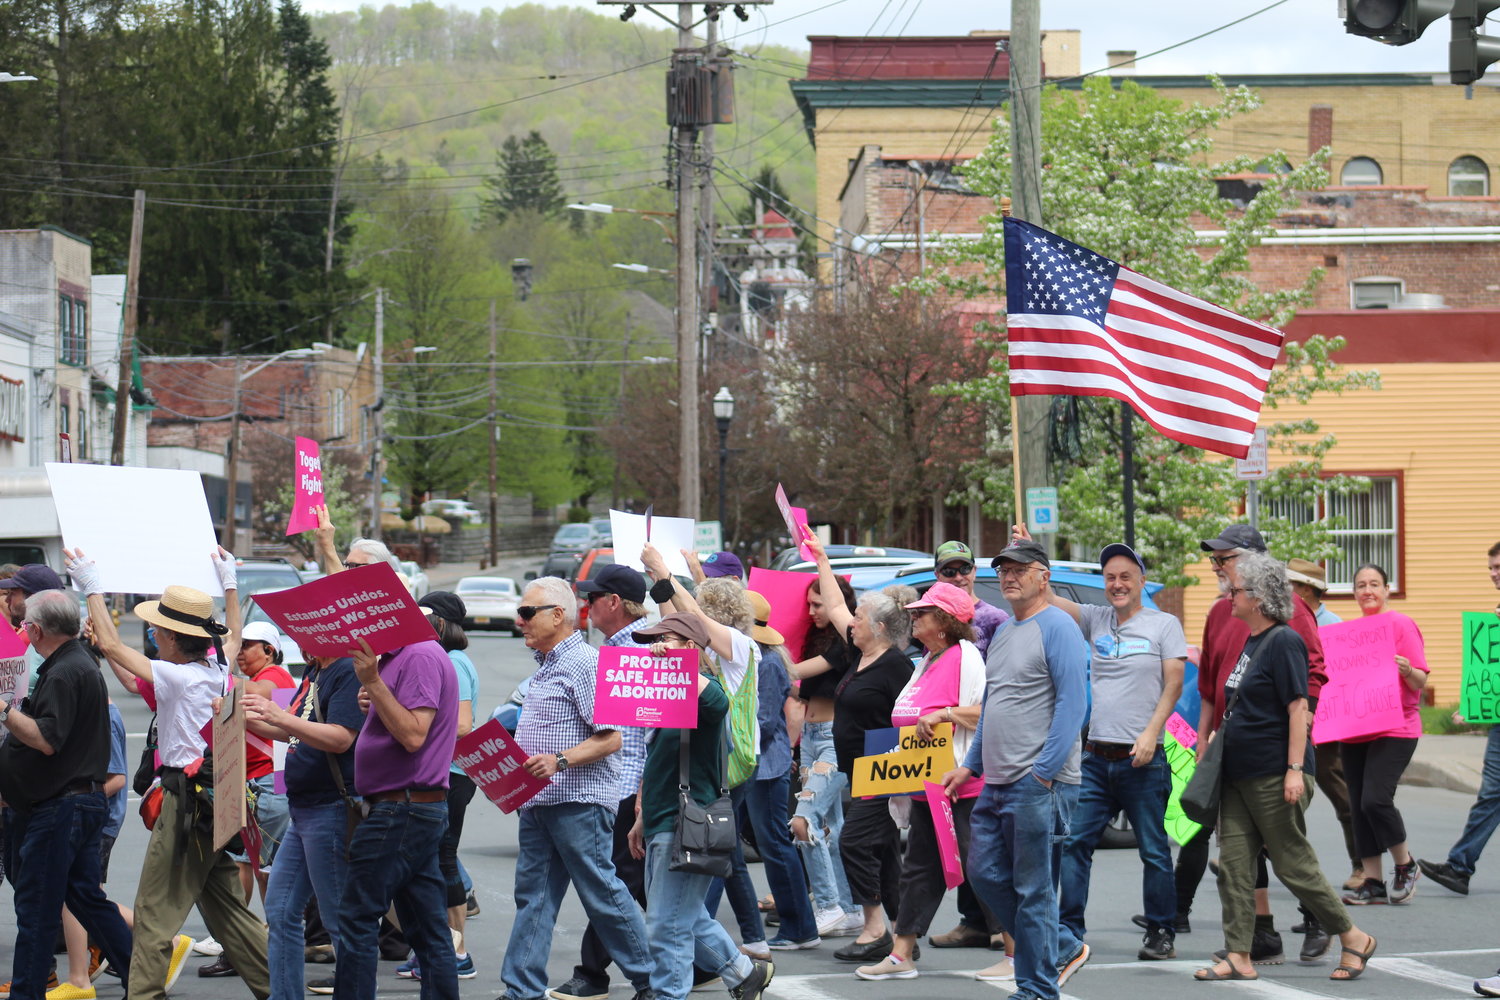 Demonstrators marched in Liberty on Saturday in support of Roe V. Wade.